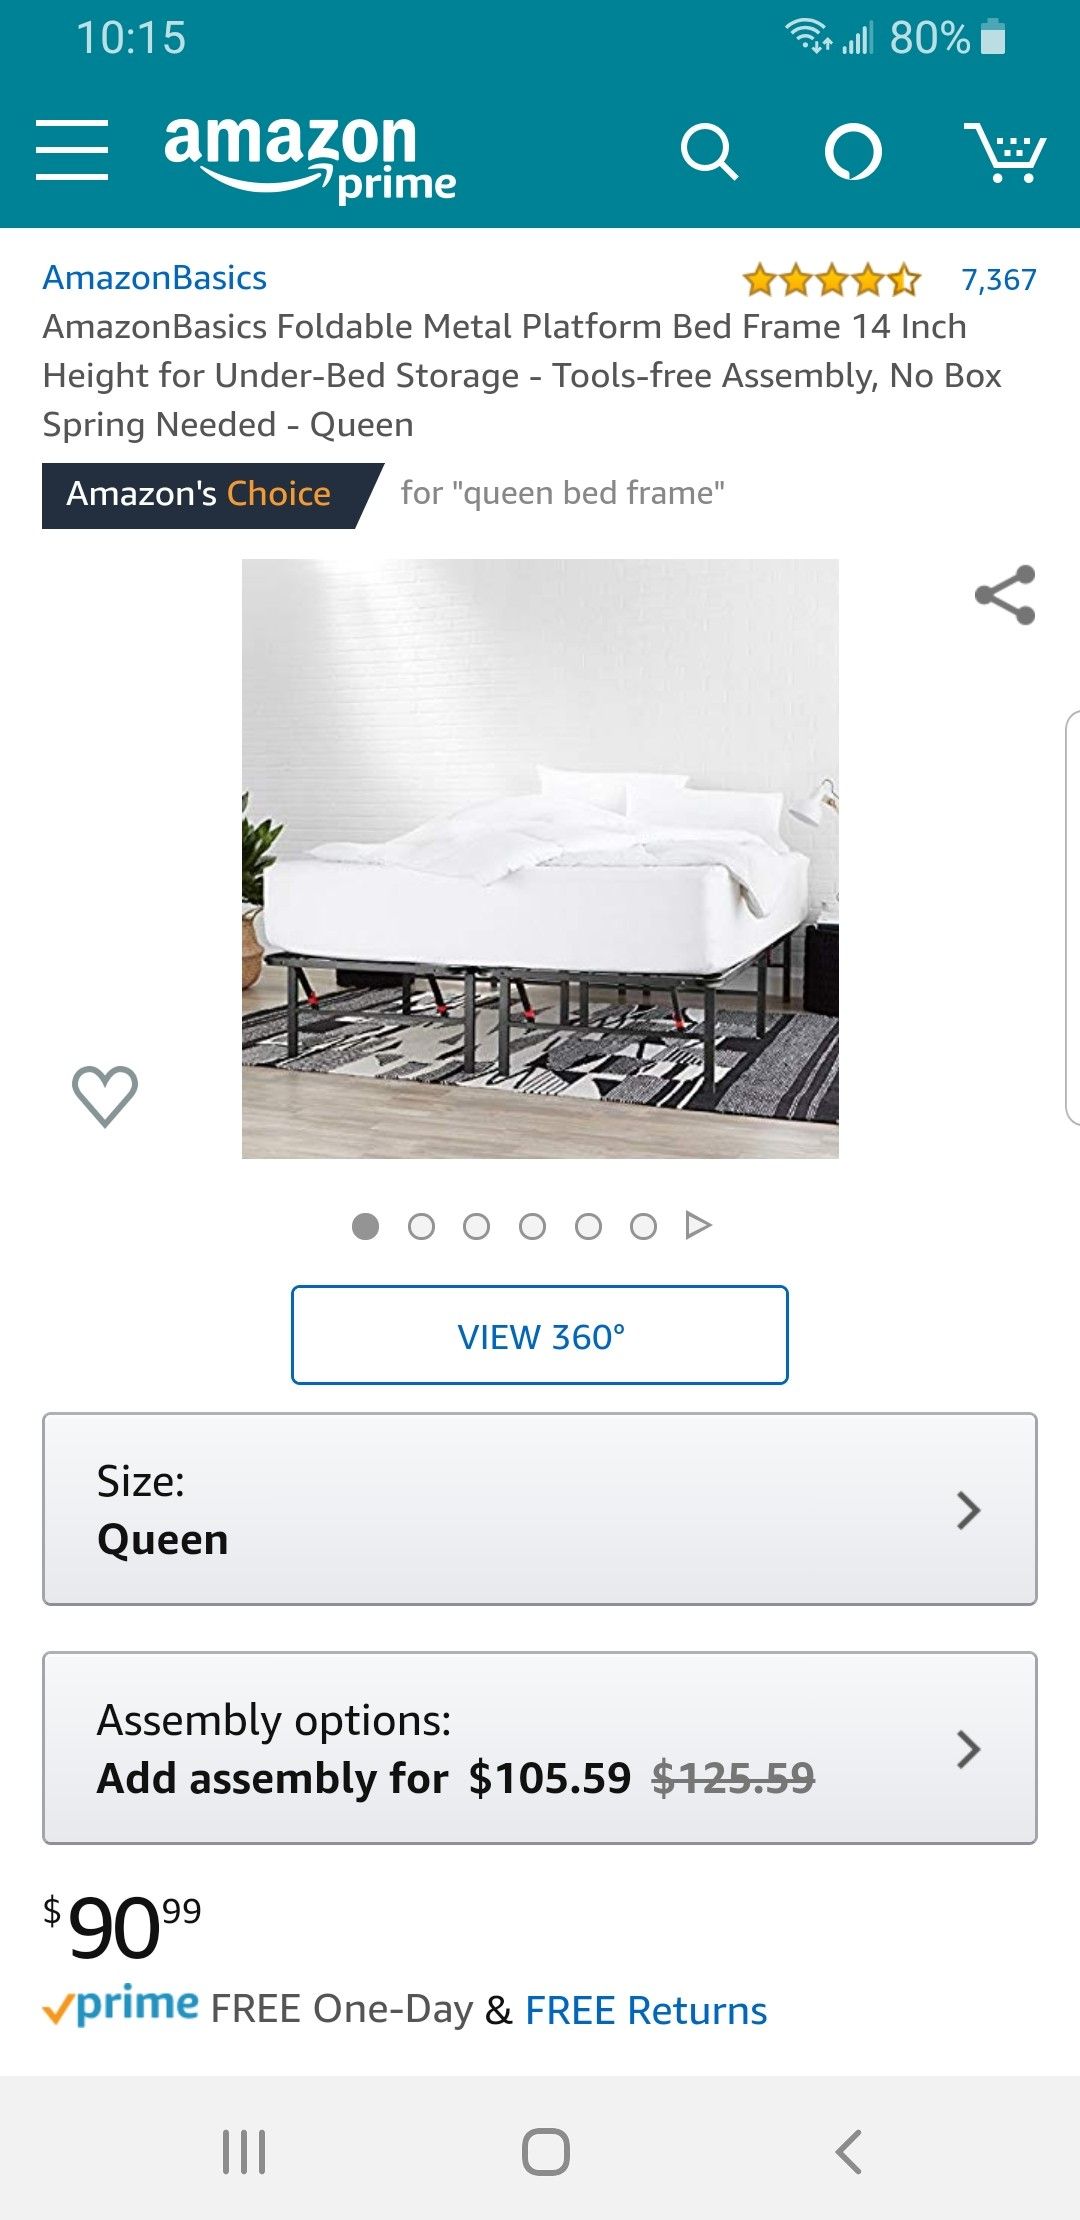 Brand new in box queen bed frame foldable